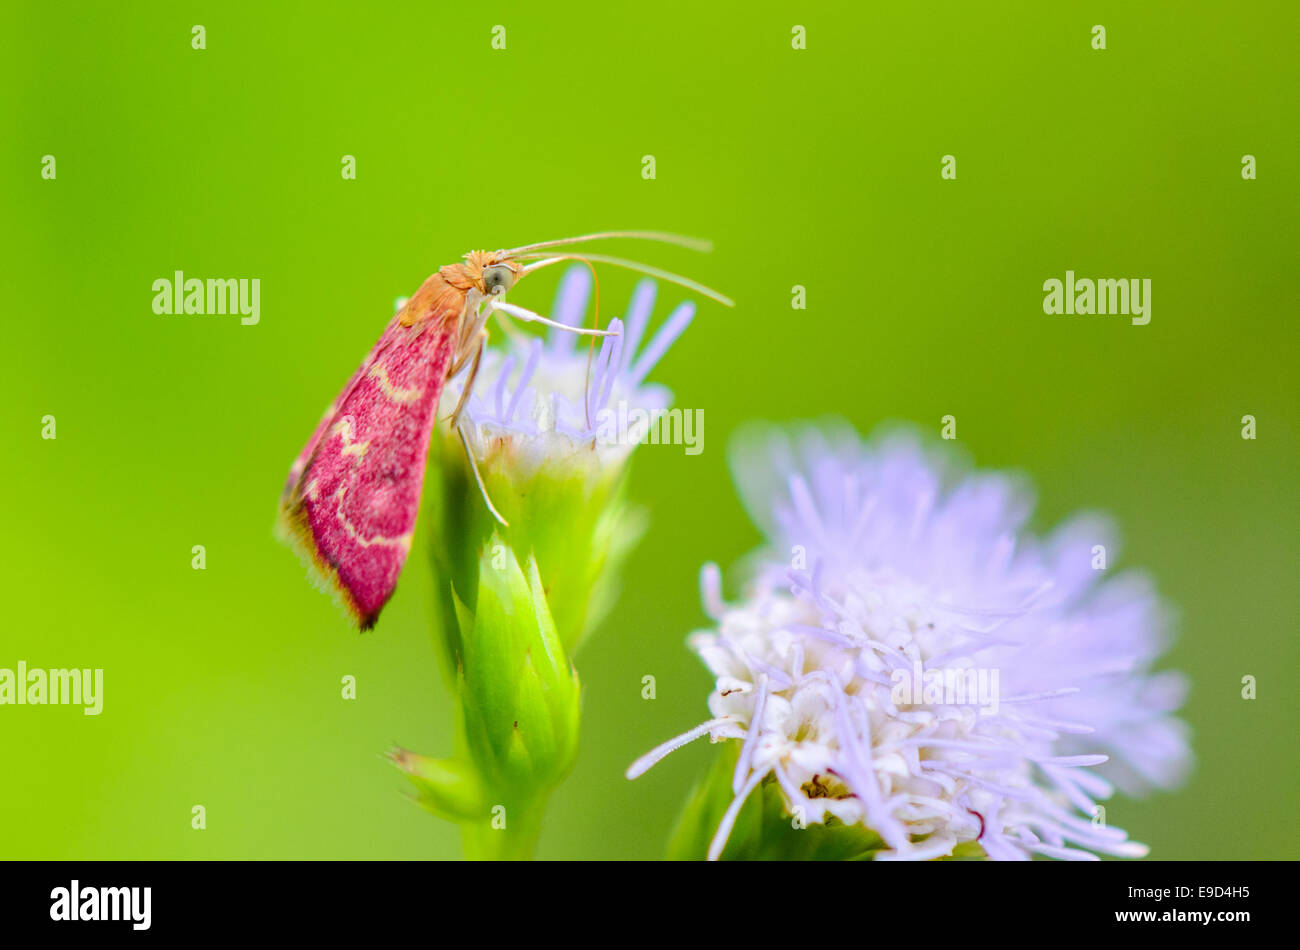 Small pink moth eating nectar on flower of grass Stock Photo